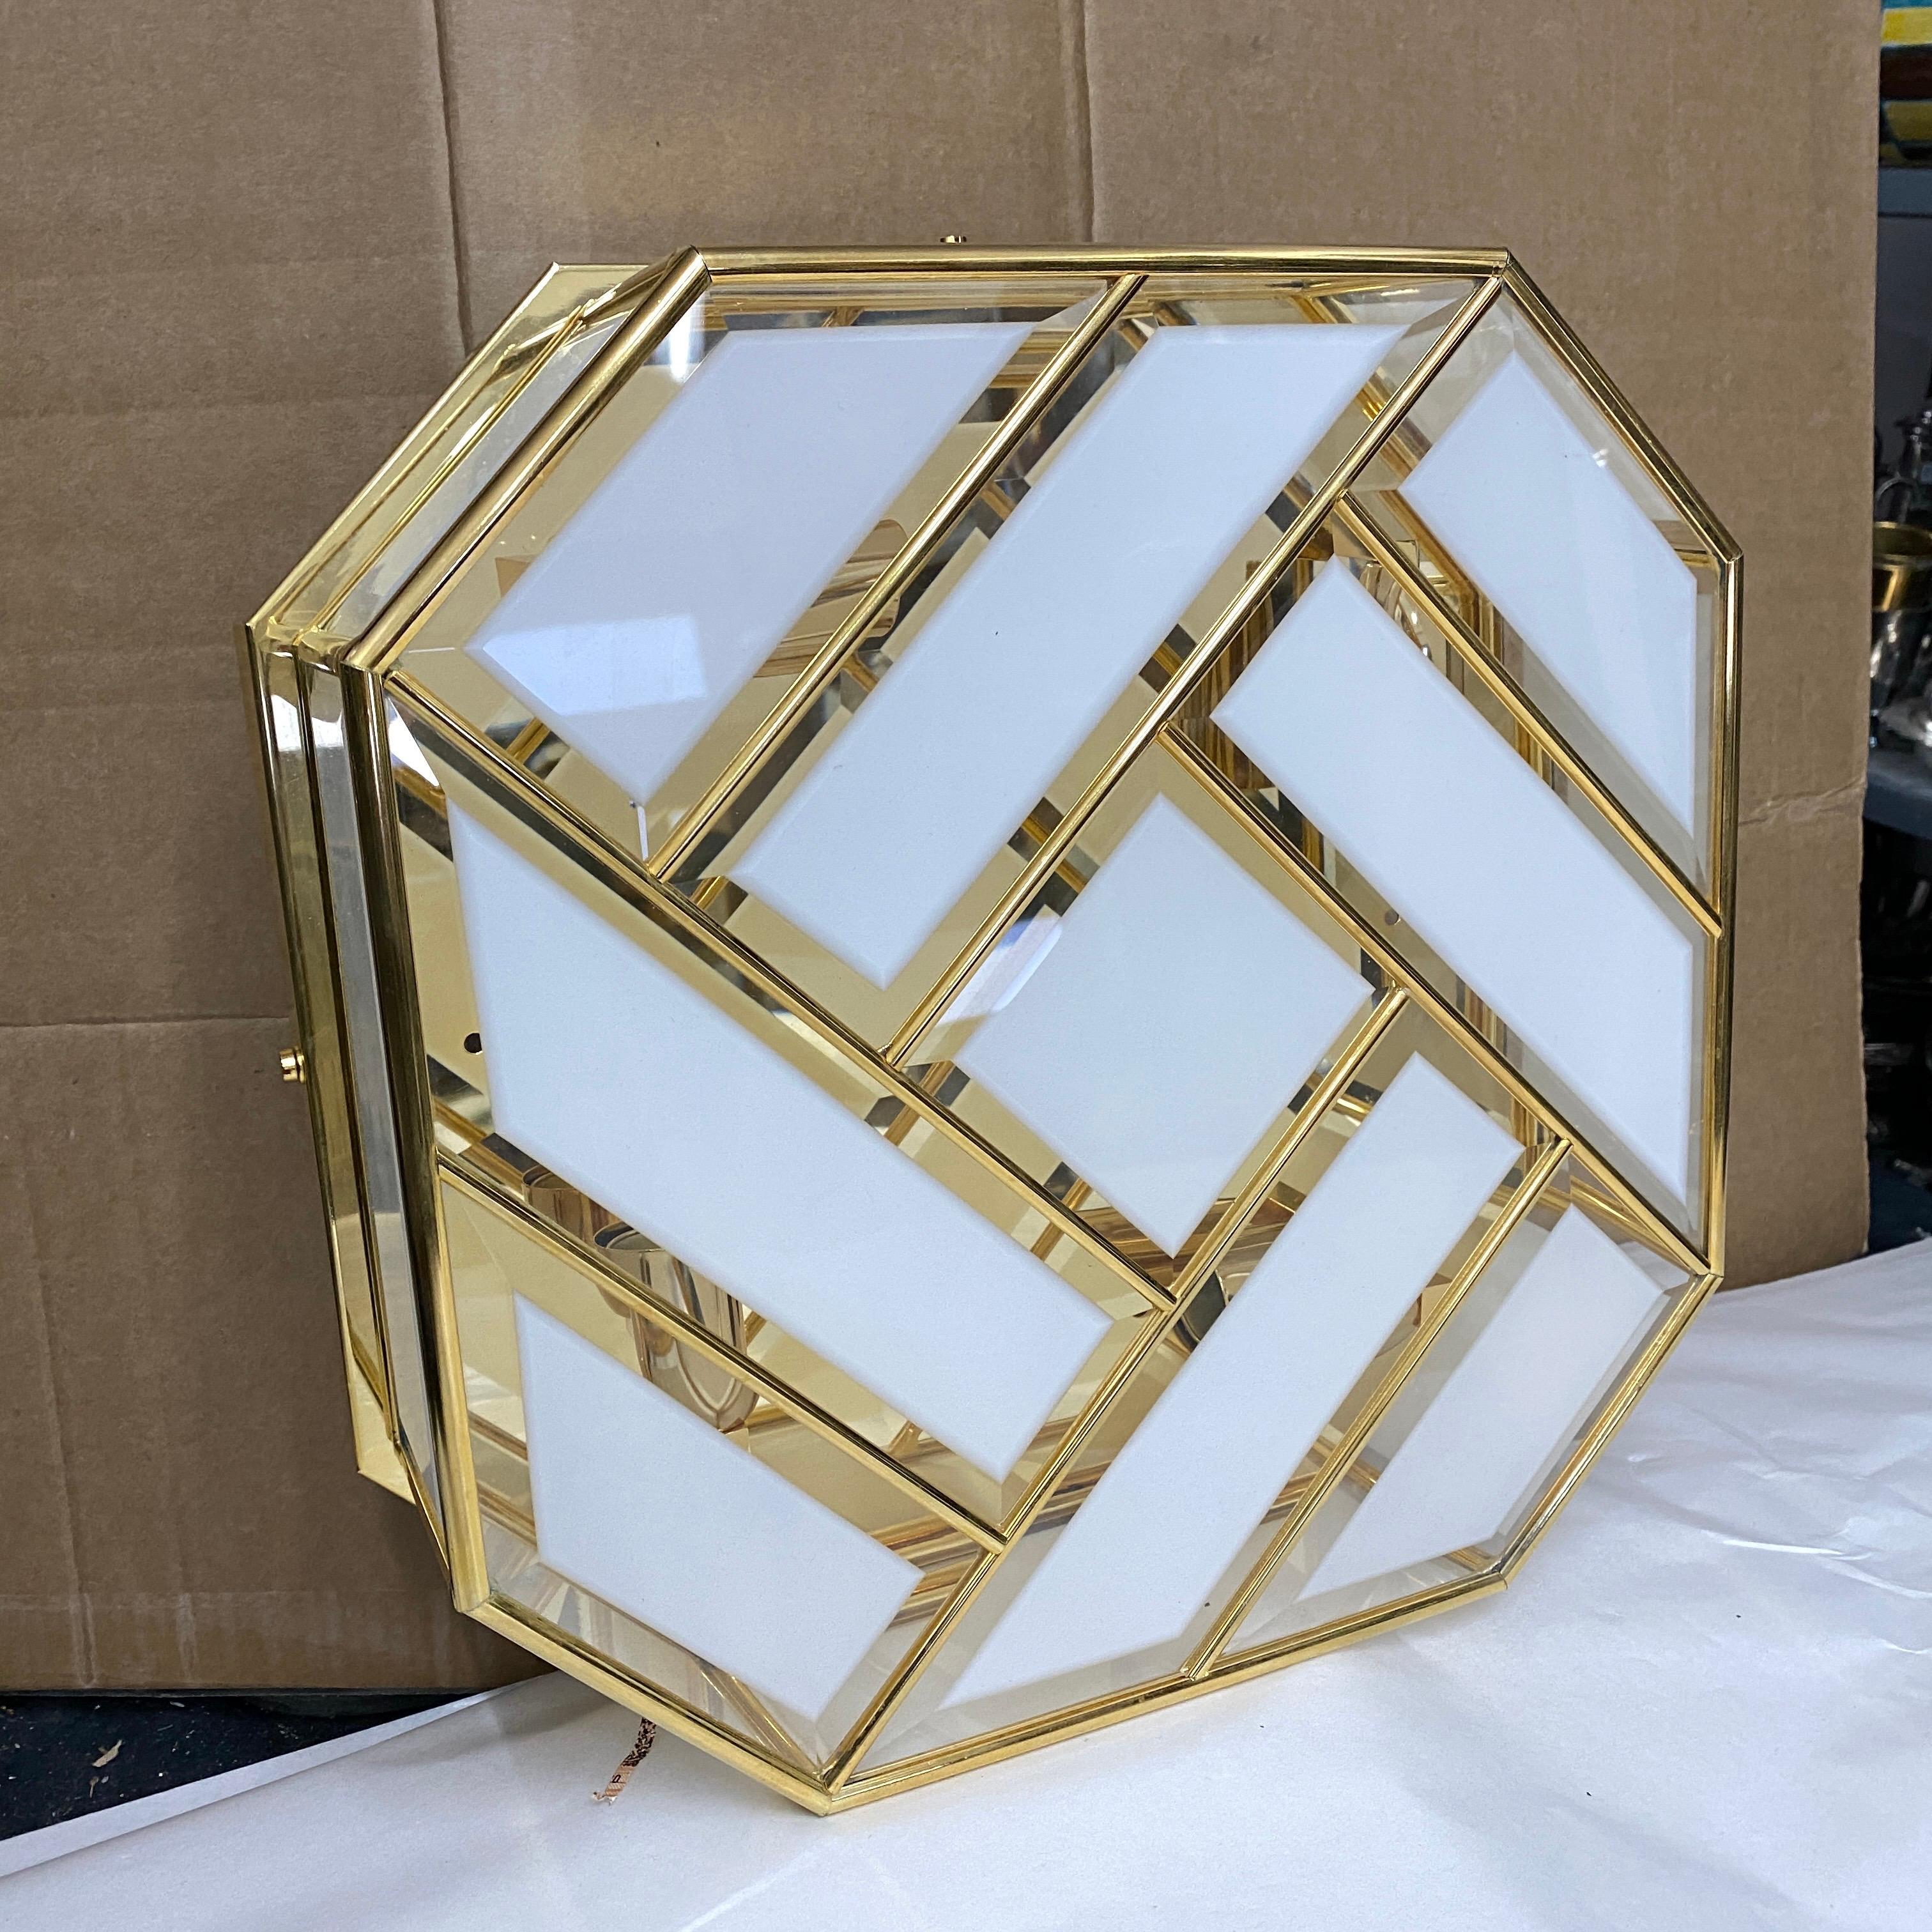 A vintage ceiling light made in Italy in the 1970s, it hasn't been never used, it comes from a closed lighting store. It's in perfect conditions.